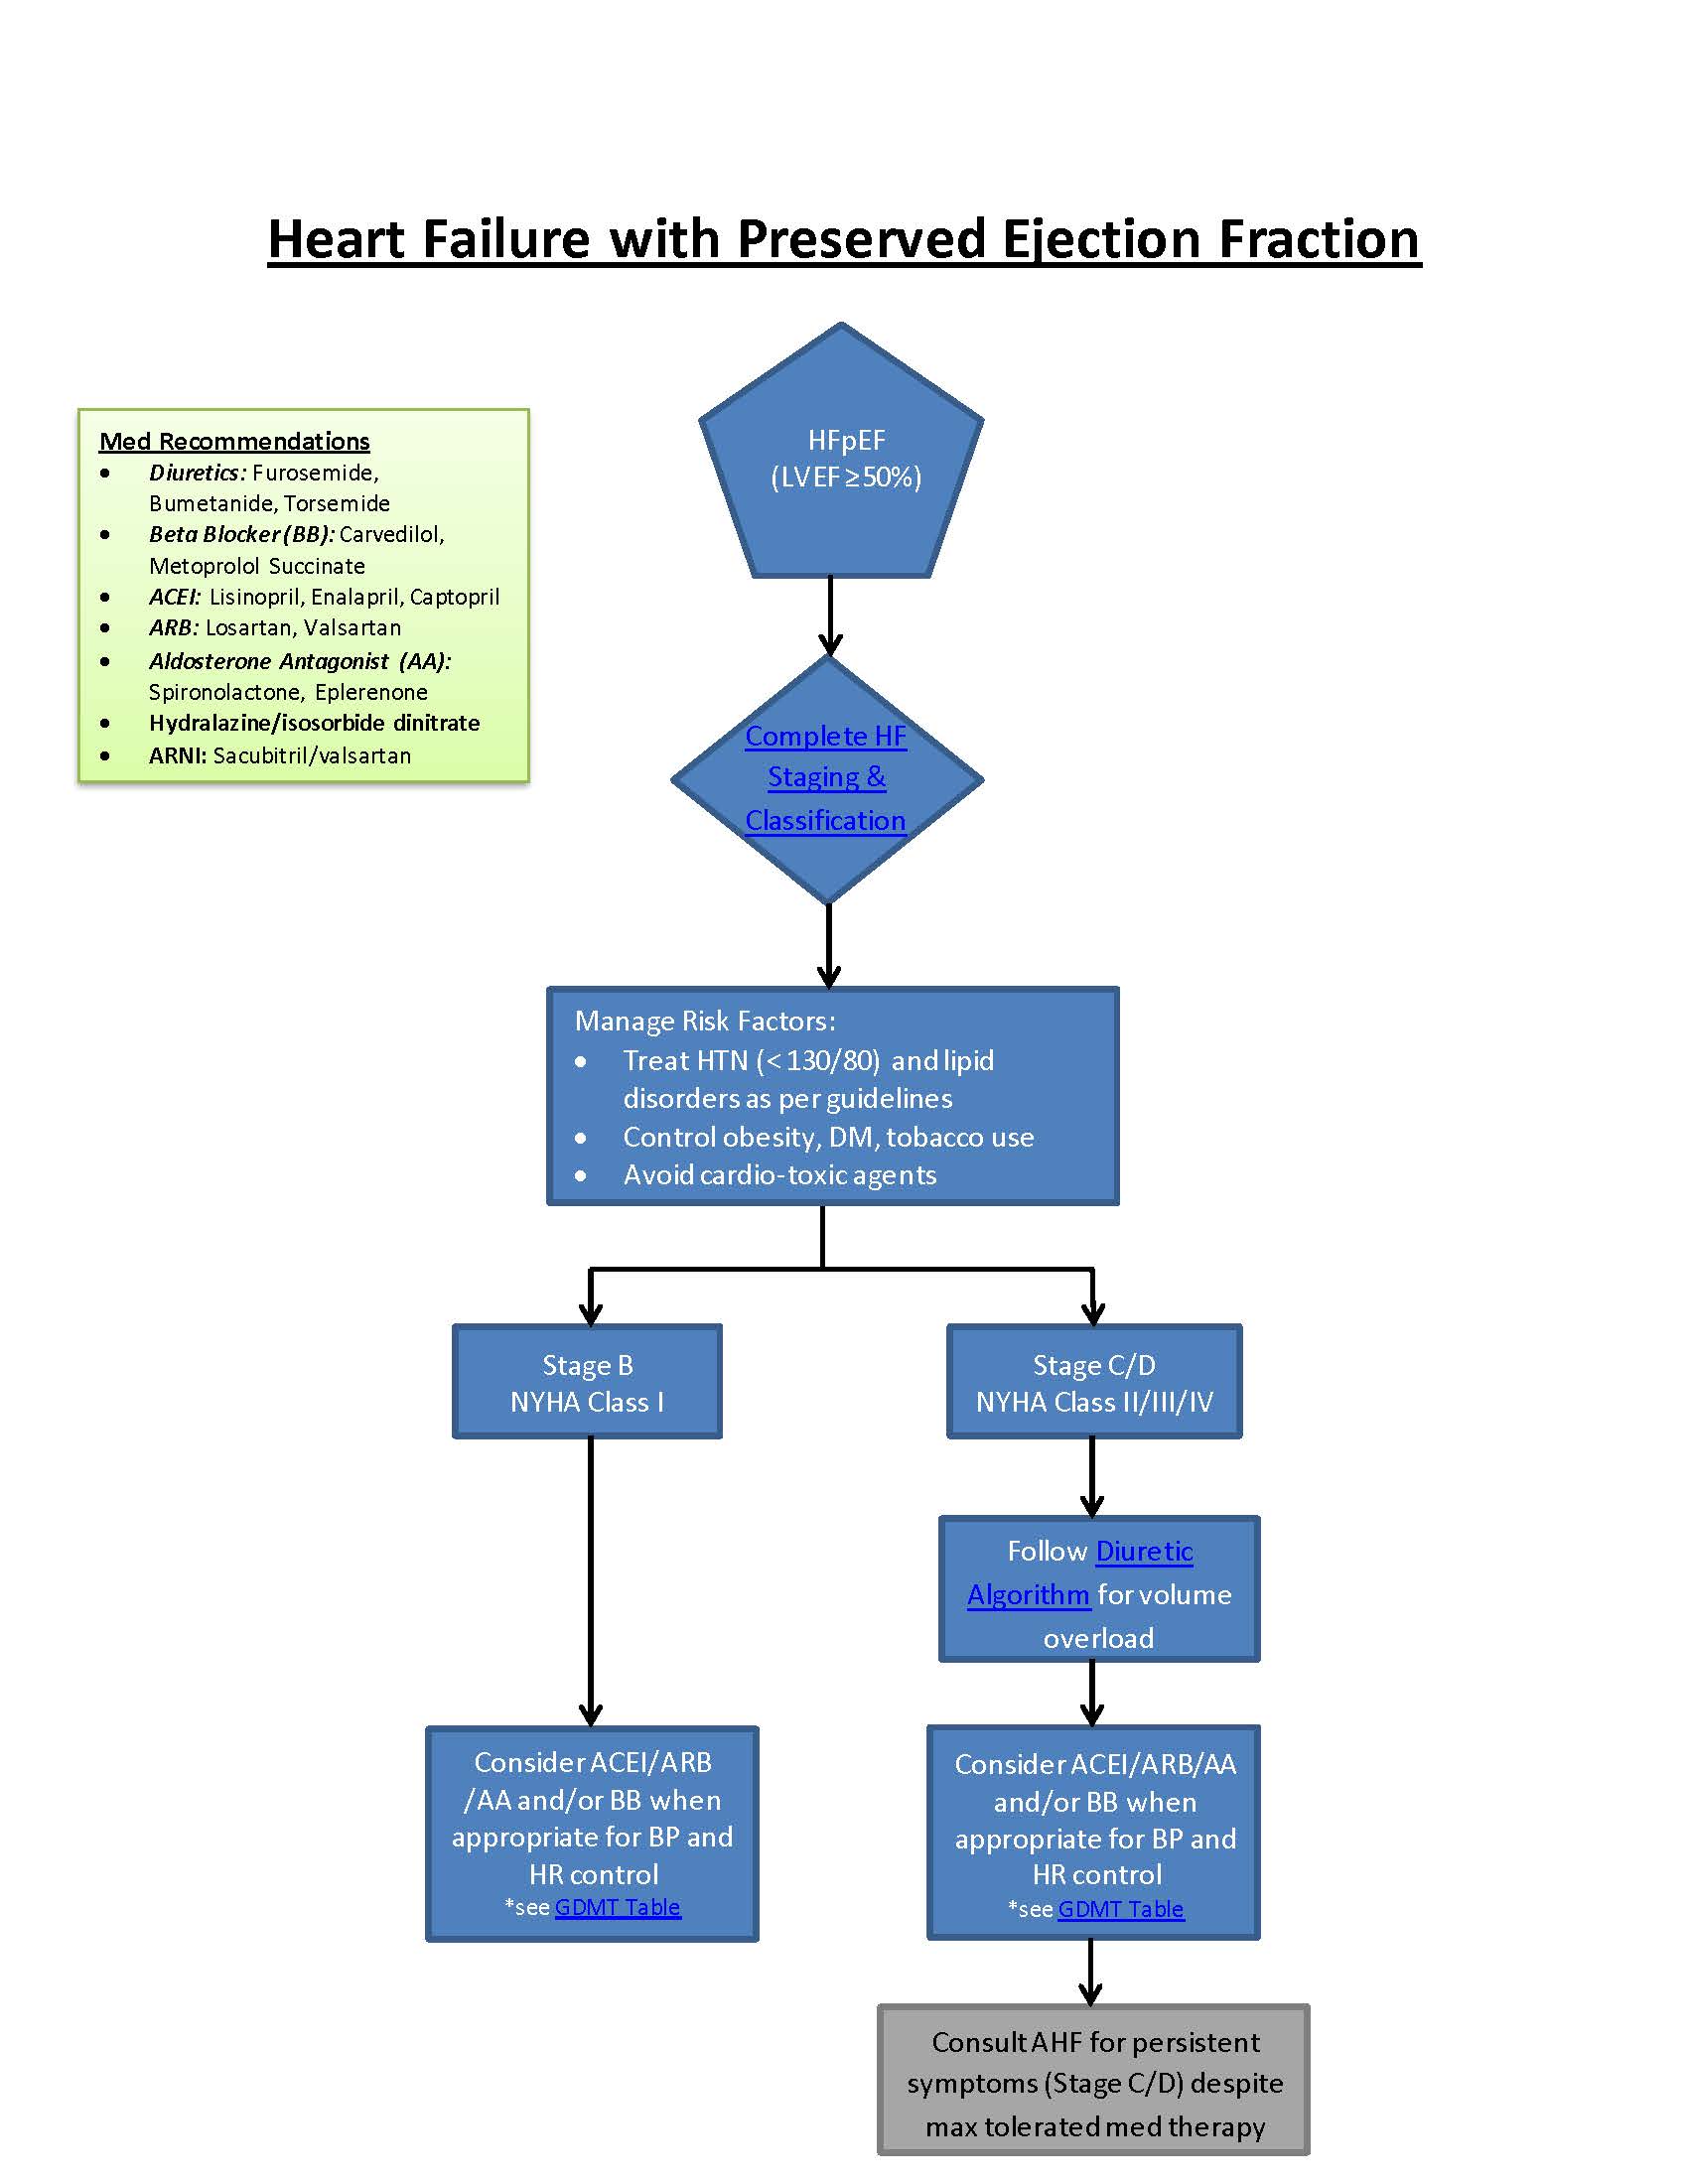 Clinical Guidelines Document Image 4